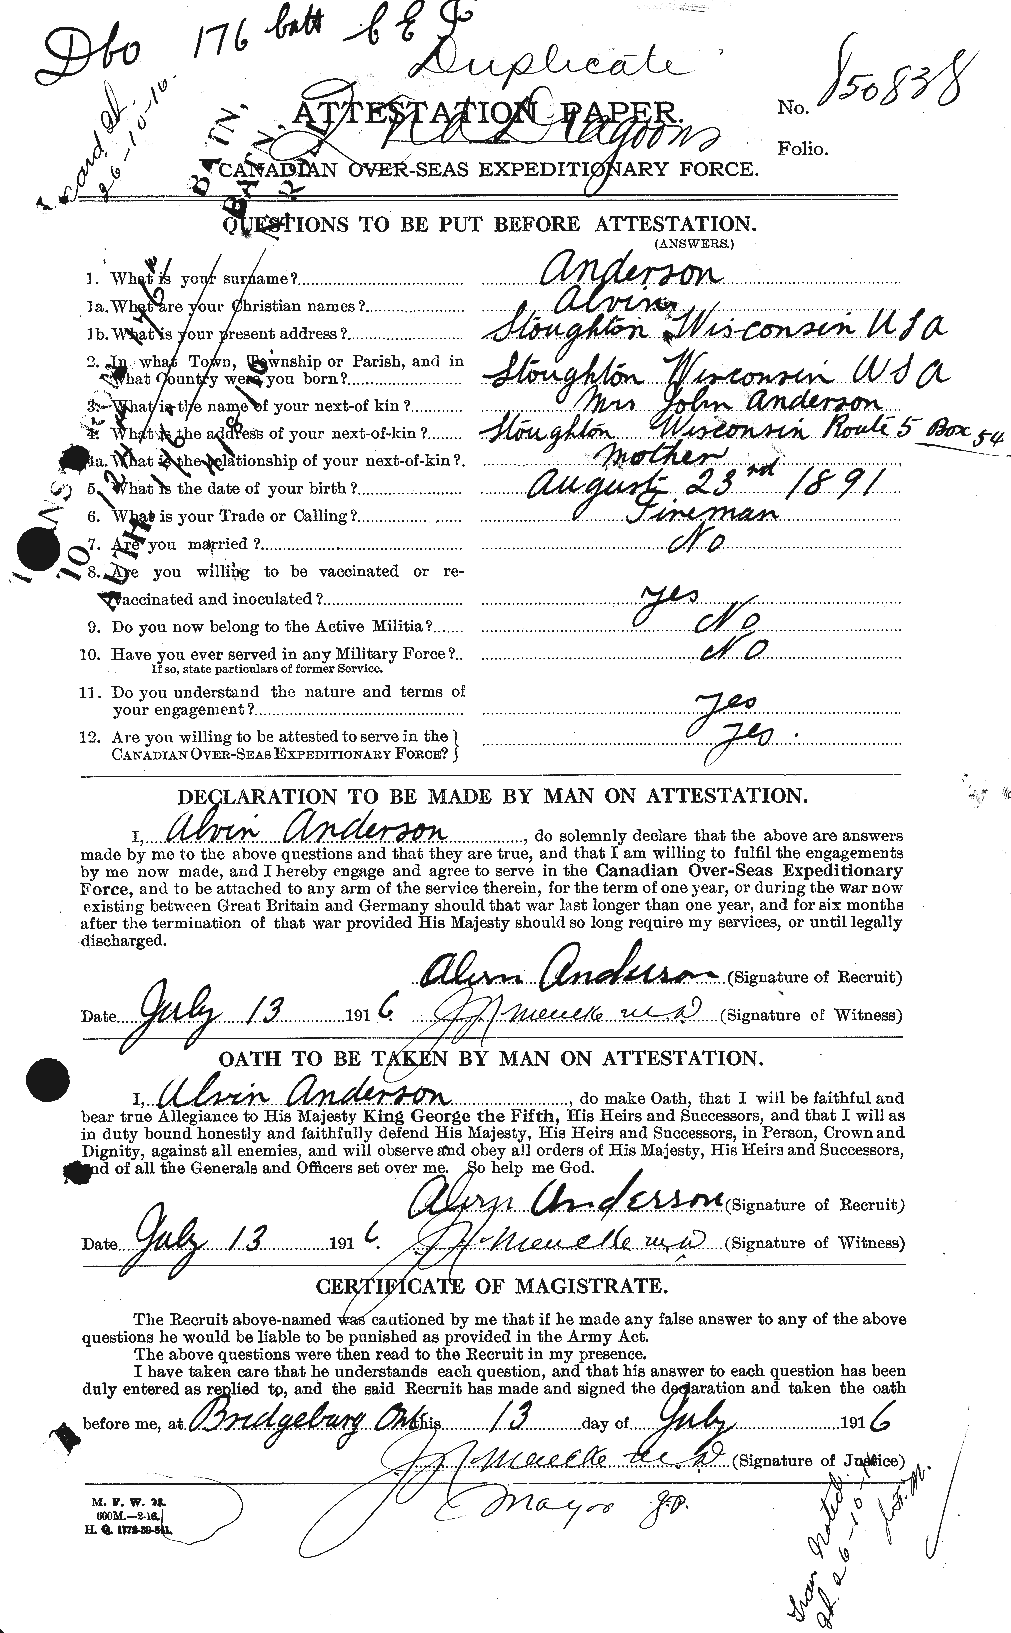 Personnel Records of the First World War - CEF 209439a